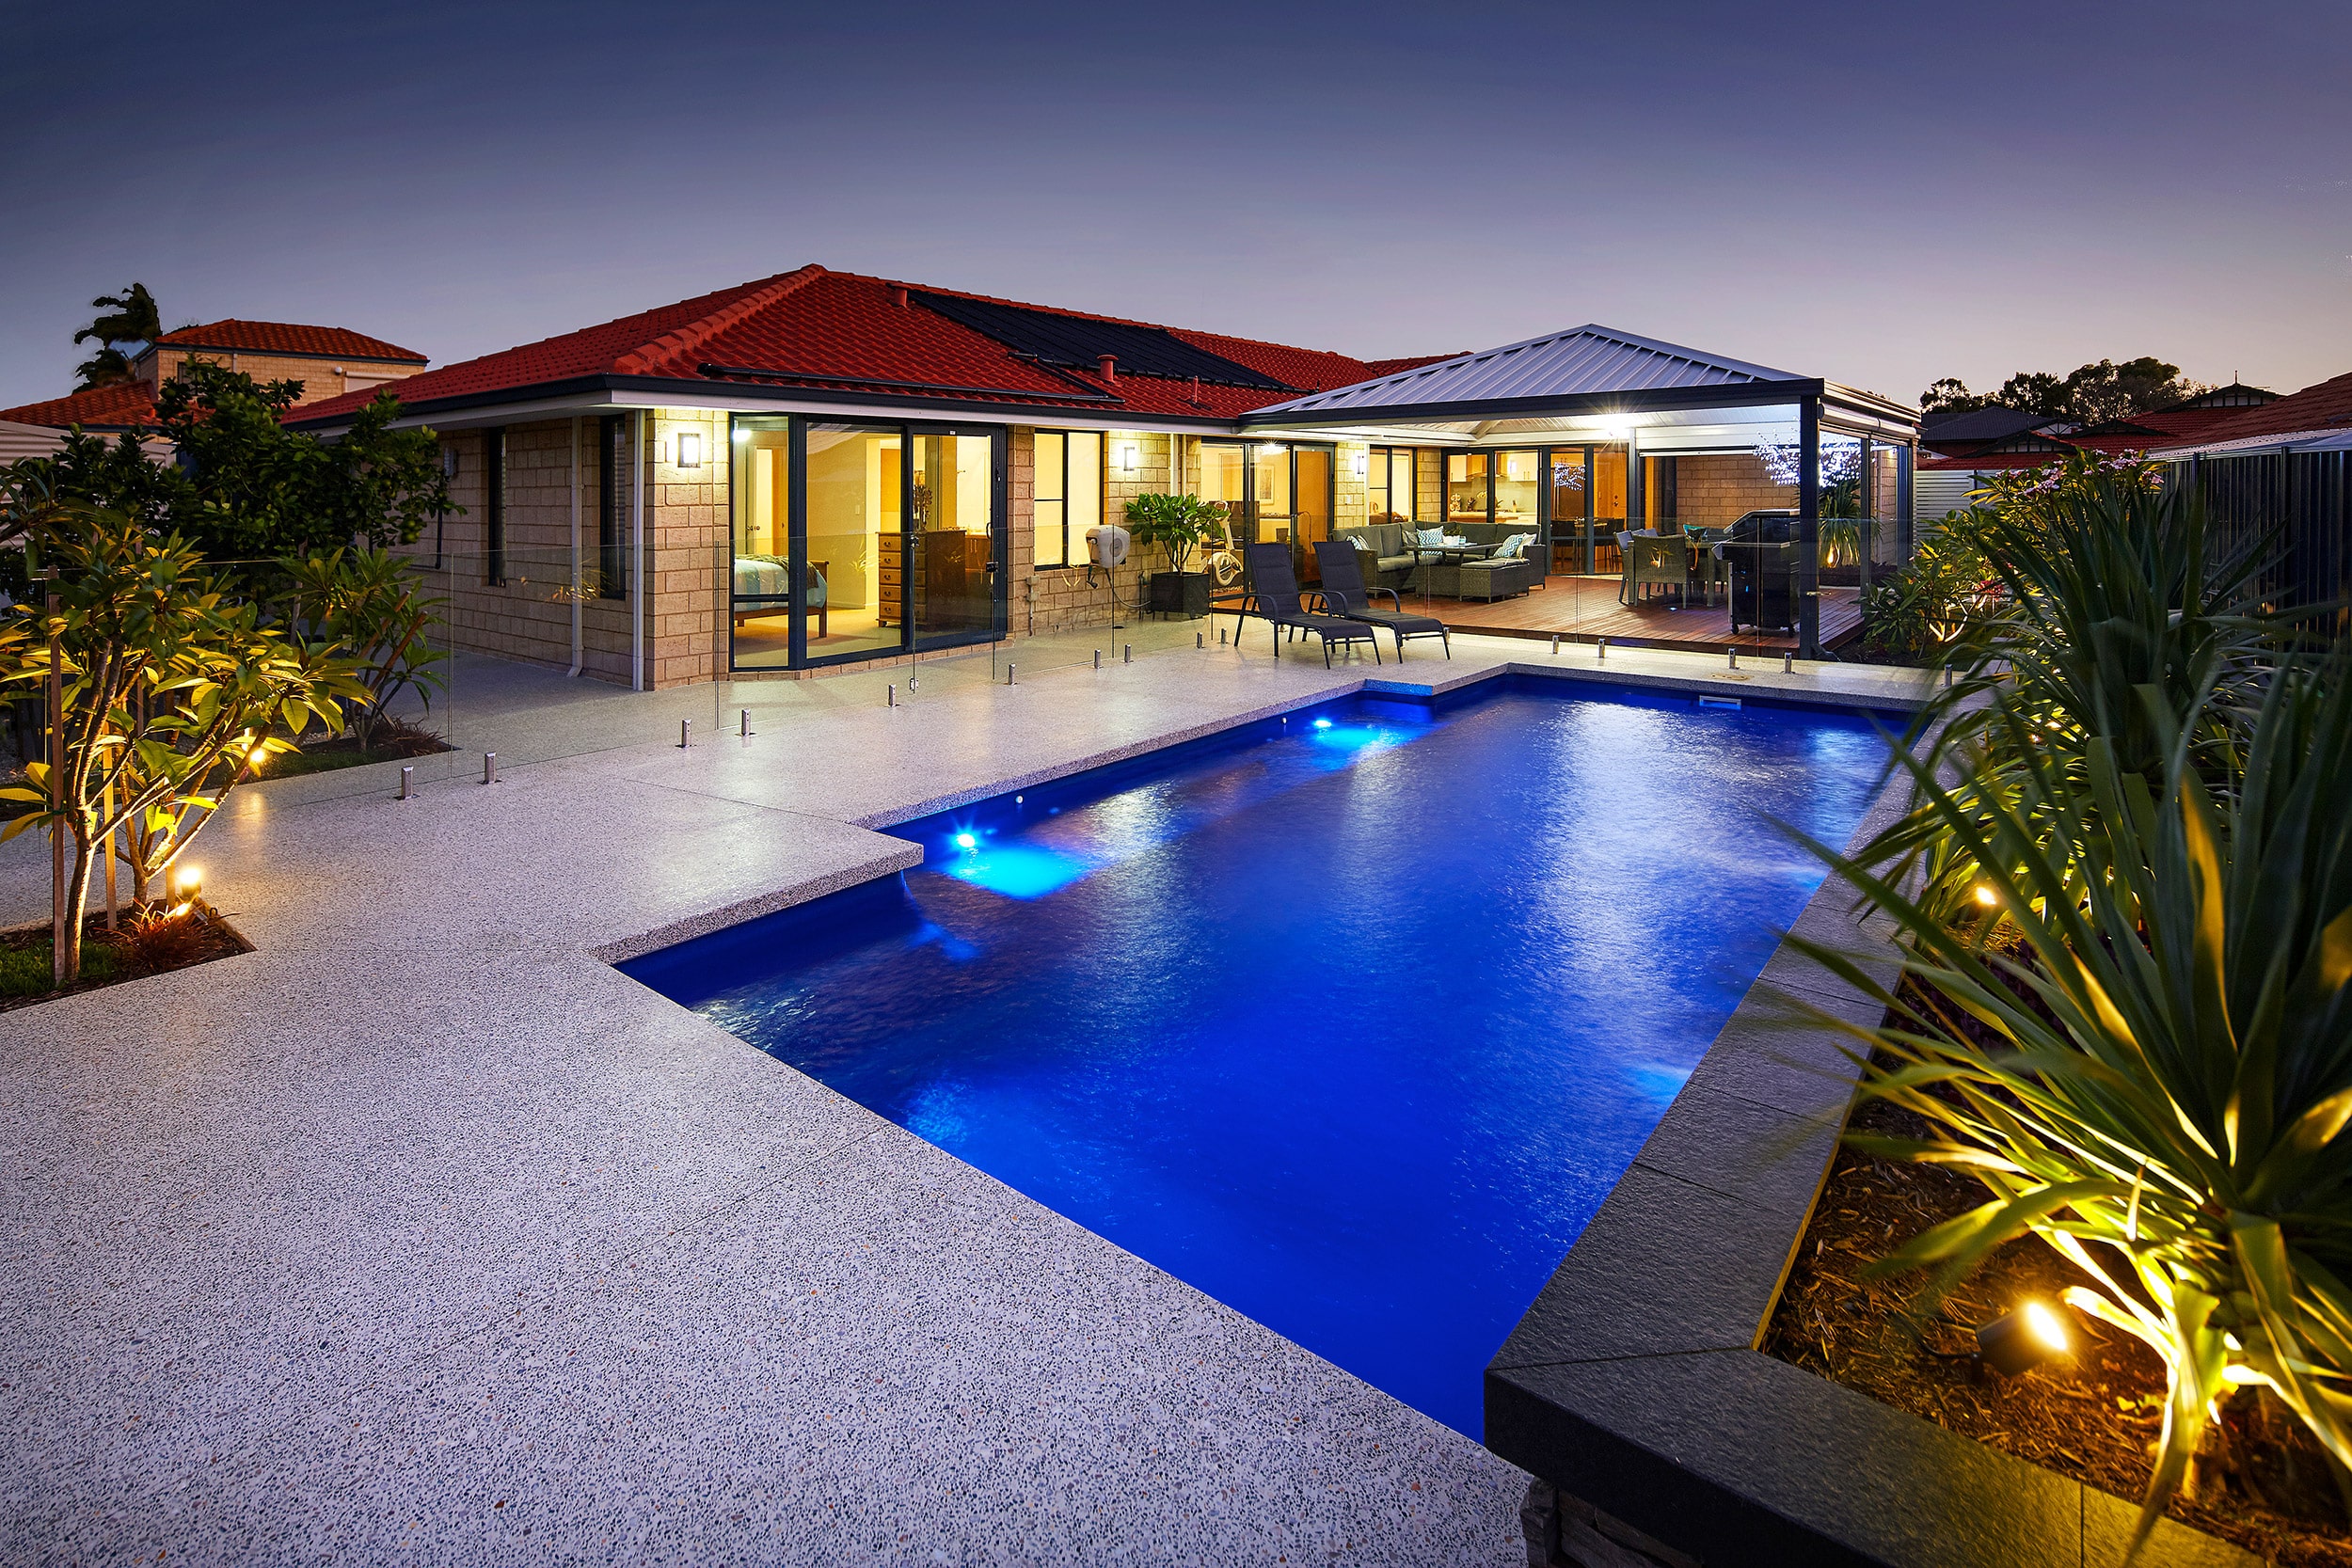 a nighttime shot of a large pool in the backyard of a house lit up by garden lights